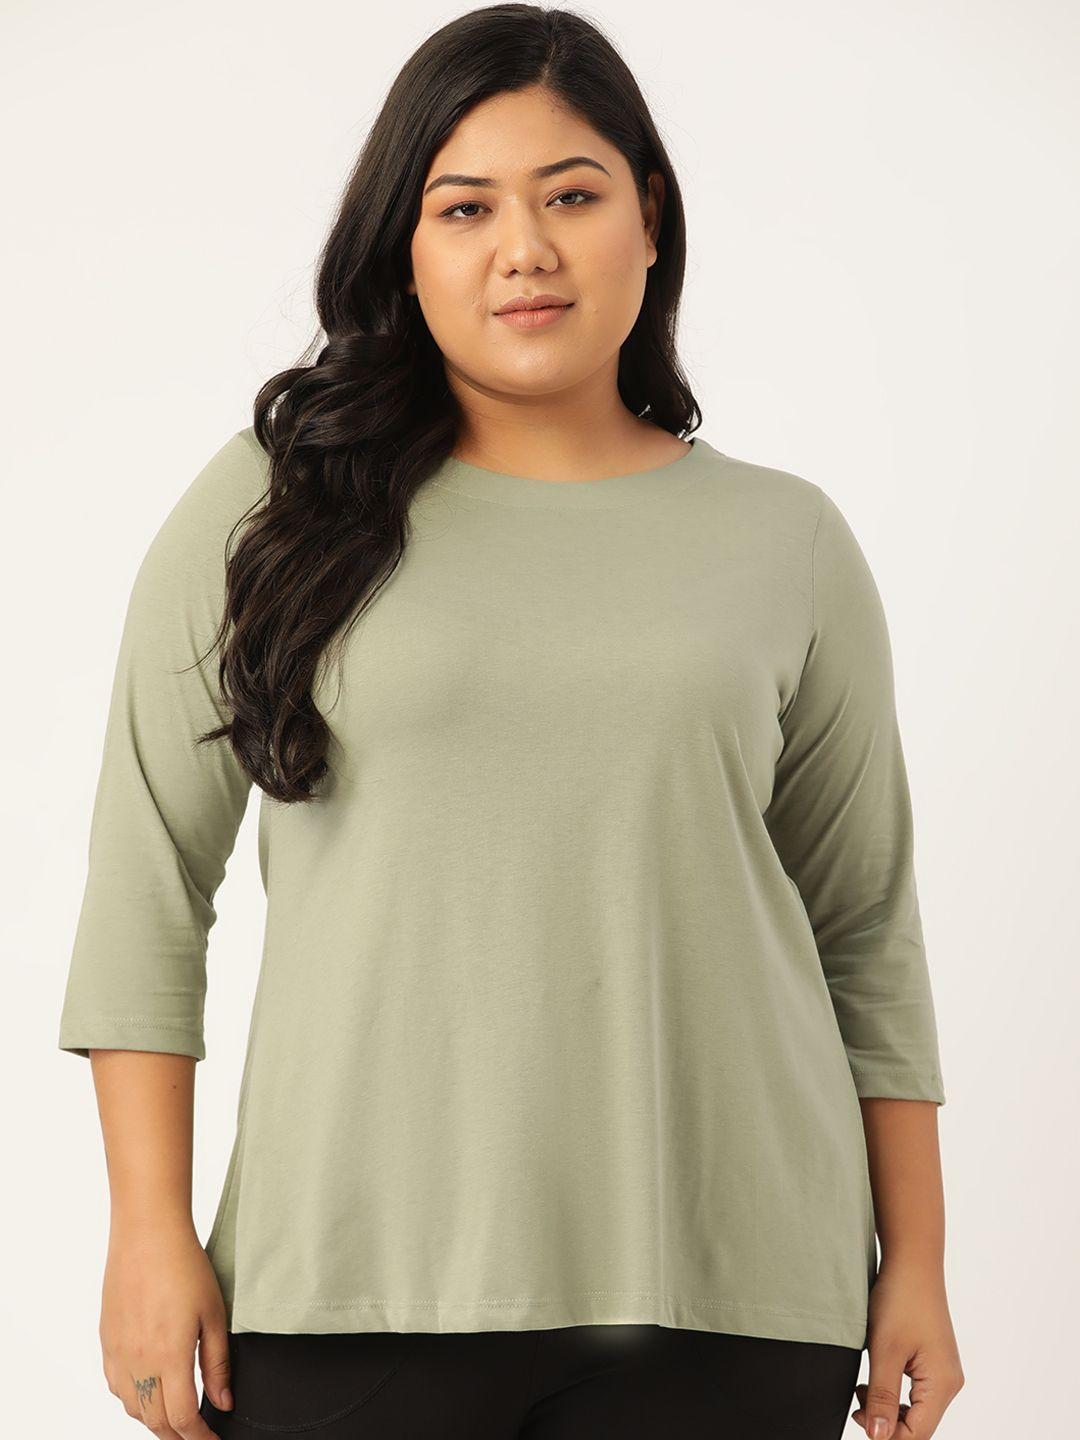 spirit animal olive green solid plus size cutout back top